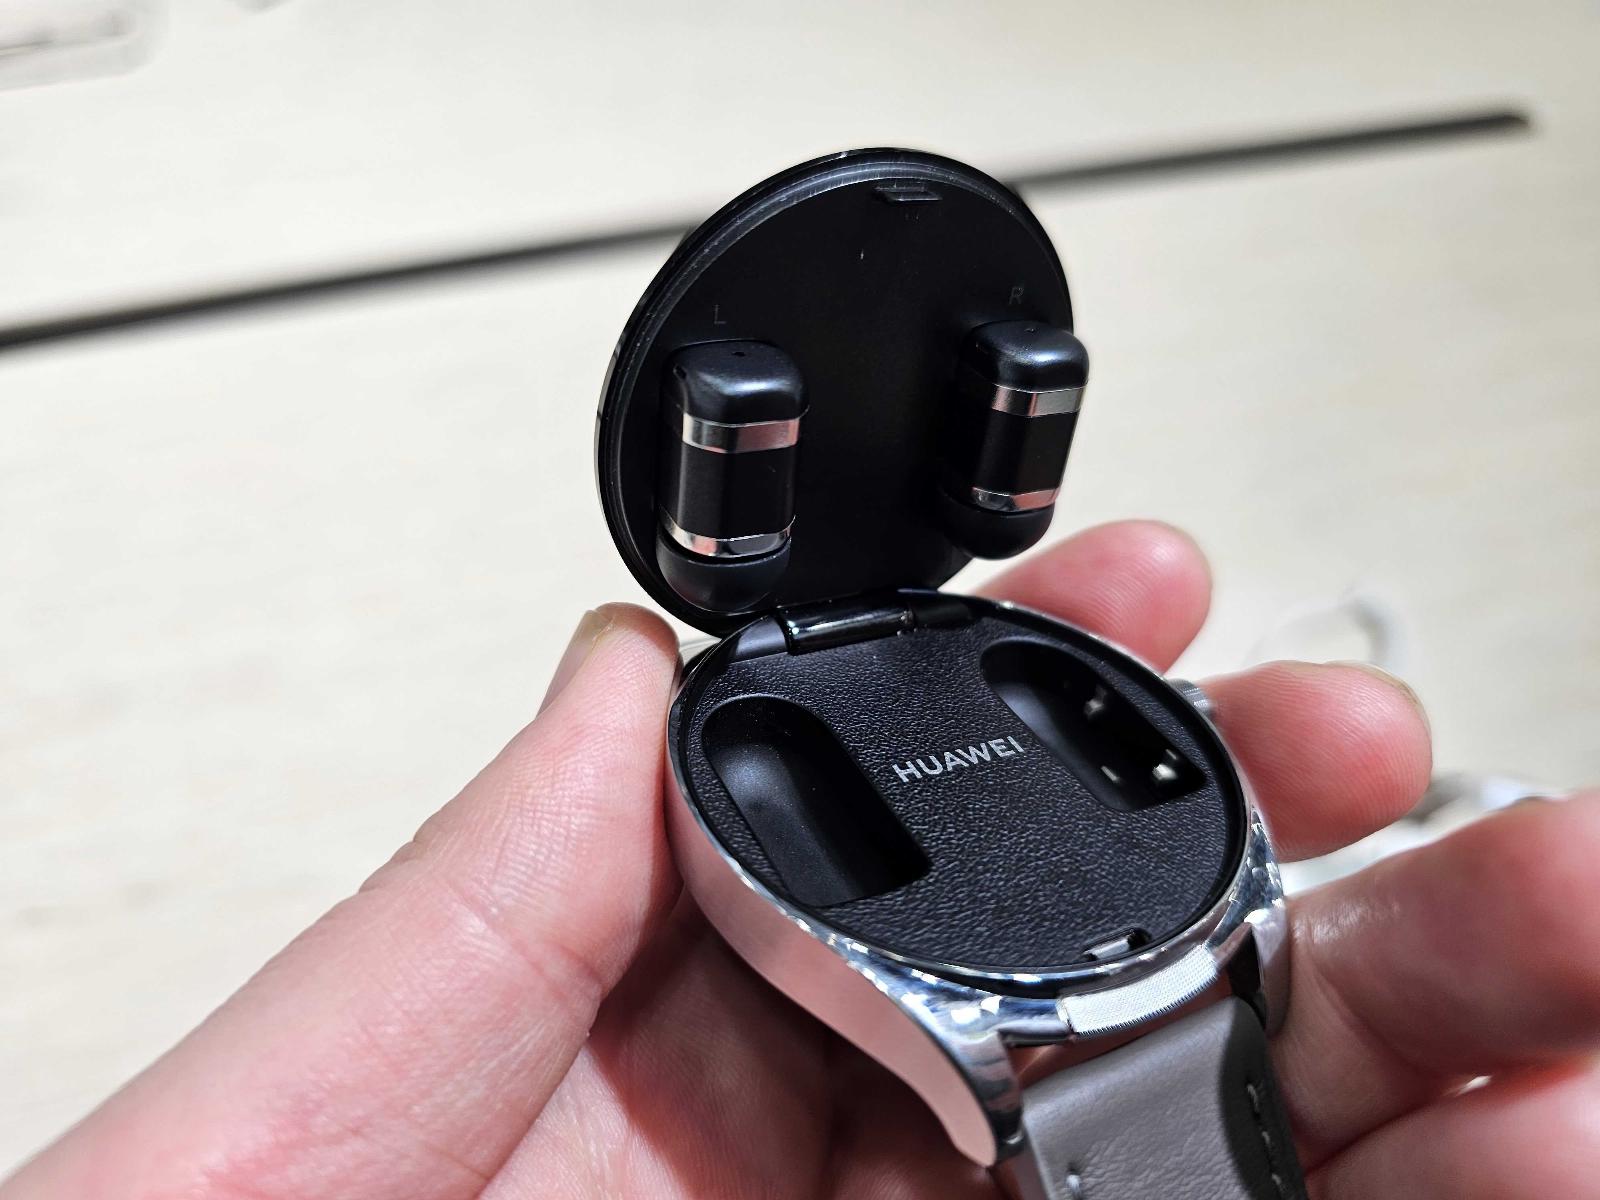 An ode to big tech cos putting earbuds in smartwatches and other weird crap